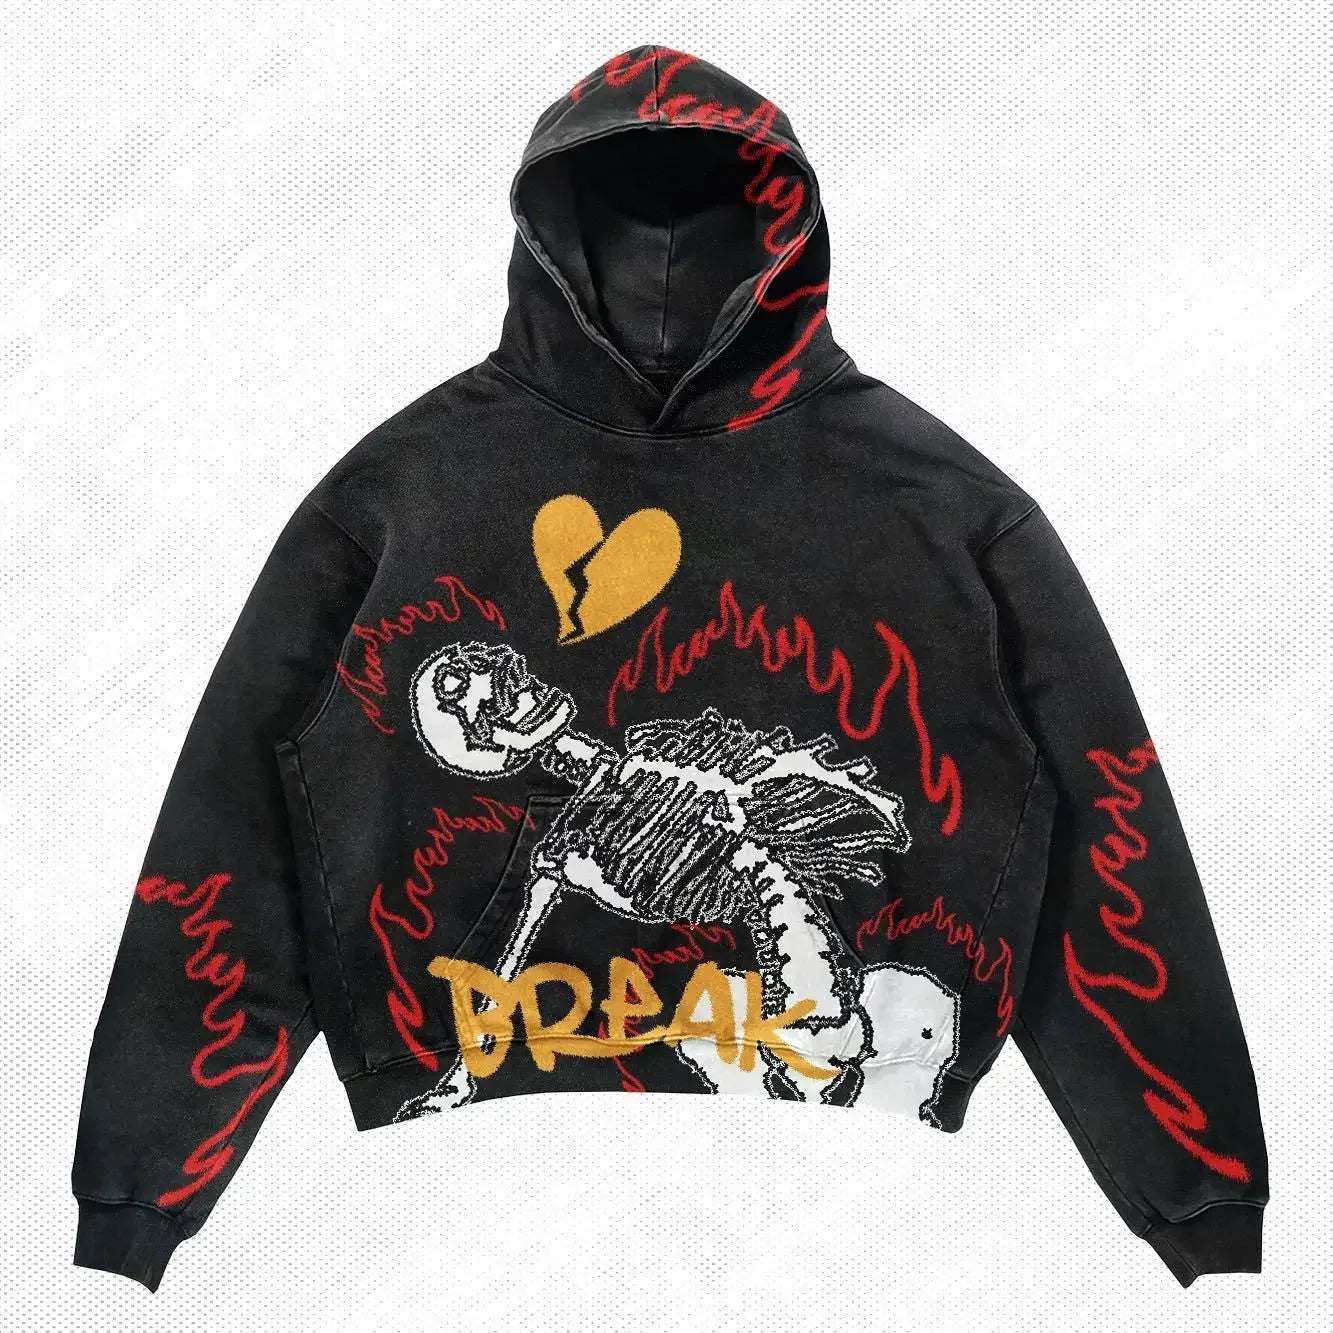 Explosions Printed Skull Y2K Retro Hooded Sweater Coat Street Style Gothic Casual Fashion Hooded Sweater Men's Female by Maramalive™ featuring a skeleton graphic, red flames, a broken heart, and the word "BREAK" in bold yellow letters. Perfect for men's clothing enthusiasts with a taste for punk style hoodies.